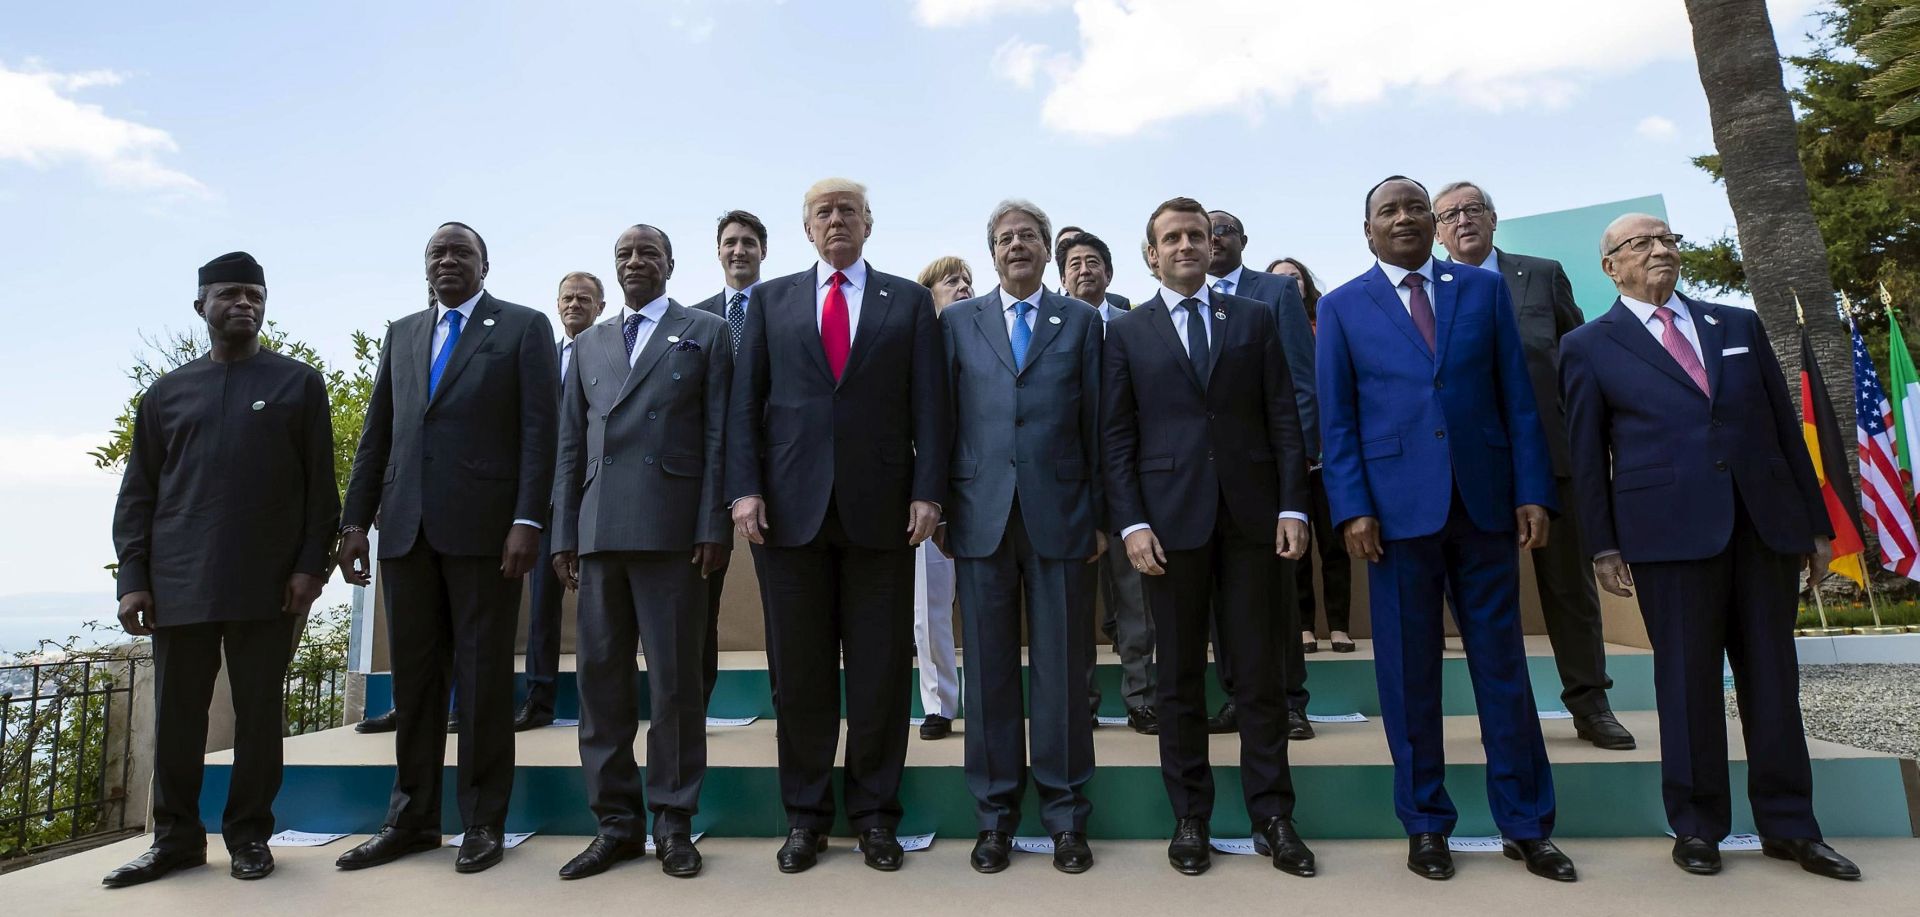 epa05992725 G7 and African leaders pose for a group photo in the Sicilian town of Taormina, Italy,  27 May 2017. The second day is scheduled to deal with Innovationand Development in Africa, Global Issues such as Human Mobility, Food Security and Gender Equality as well as the G7 Global Relations,  the Italian G7 Presidency said in a media release. Heads of States and of Governments of the G7, the group of most industrialized economies, plus the European Union, meet in Taormina, Italy, from 26 to 27 May 2017 for a summit titled 'Building the Foundations of Renewed Trust'.  EPA/ANGELO CARCONI